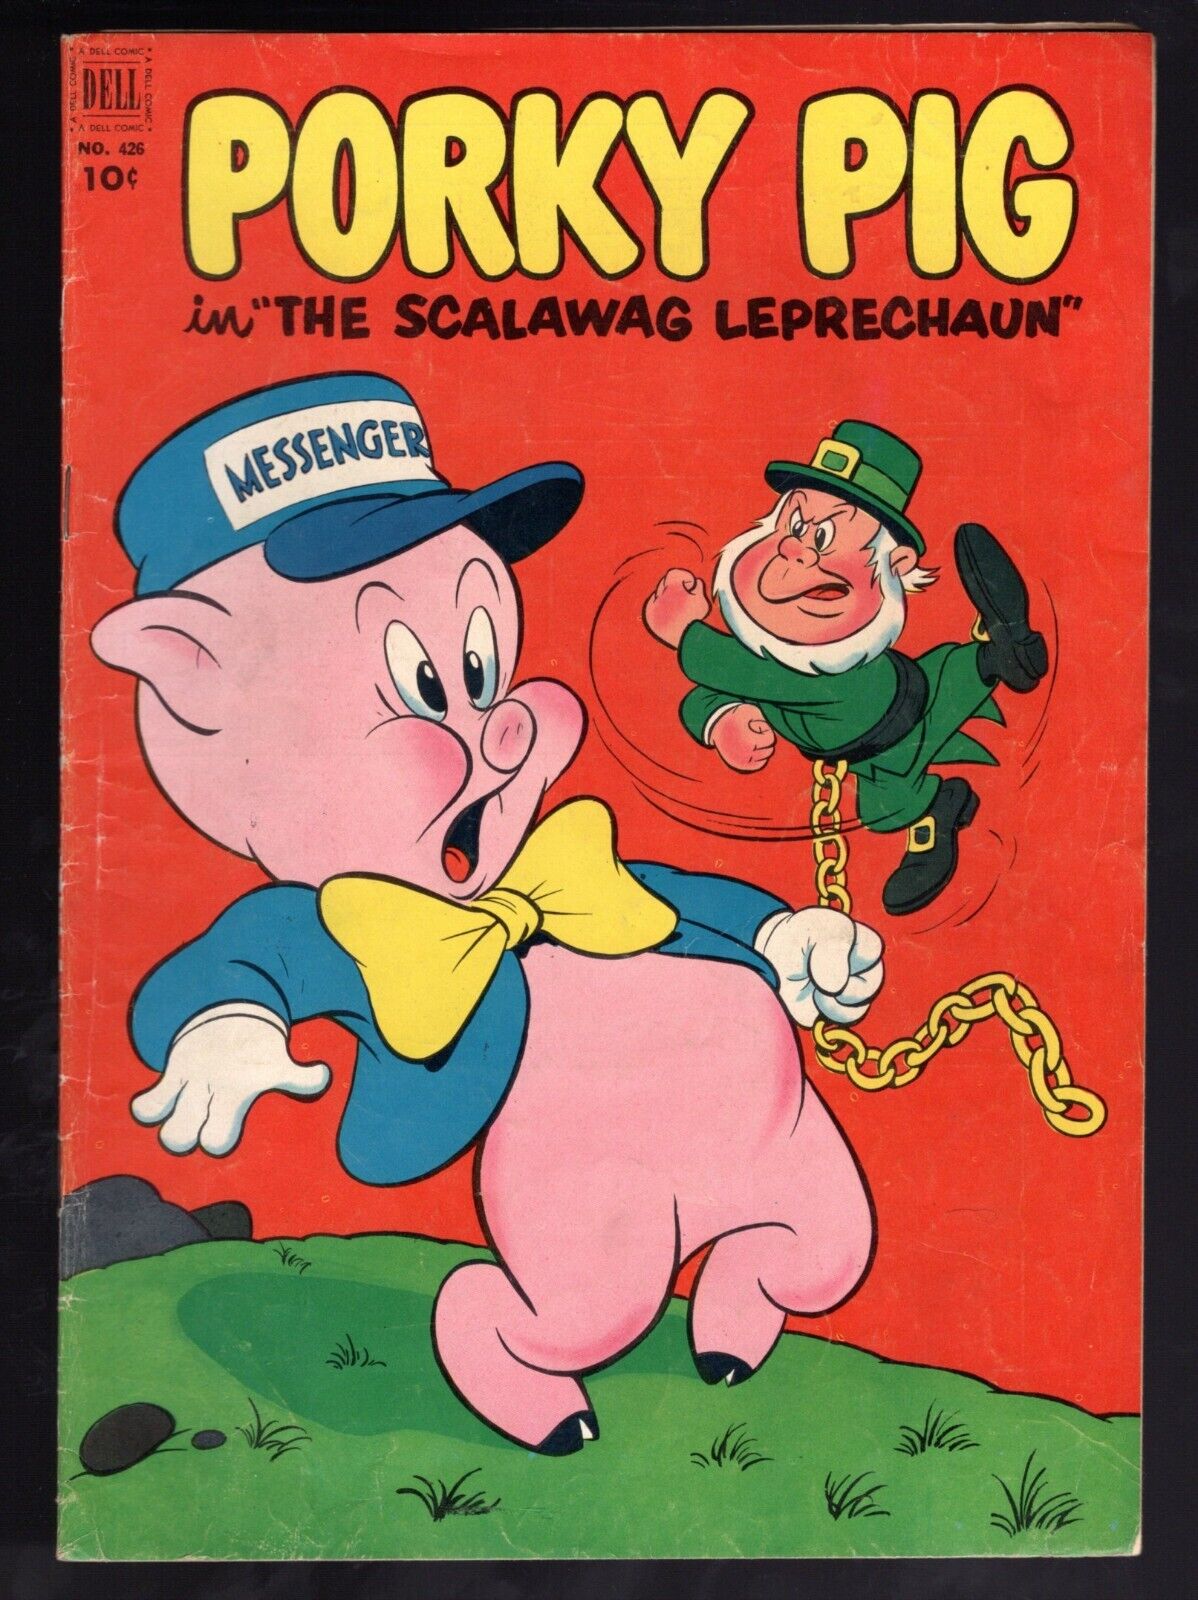 Four Color #426 Porky Pig In The Scalawag Leprechaun - 1952 Dell - VG/VG+